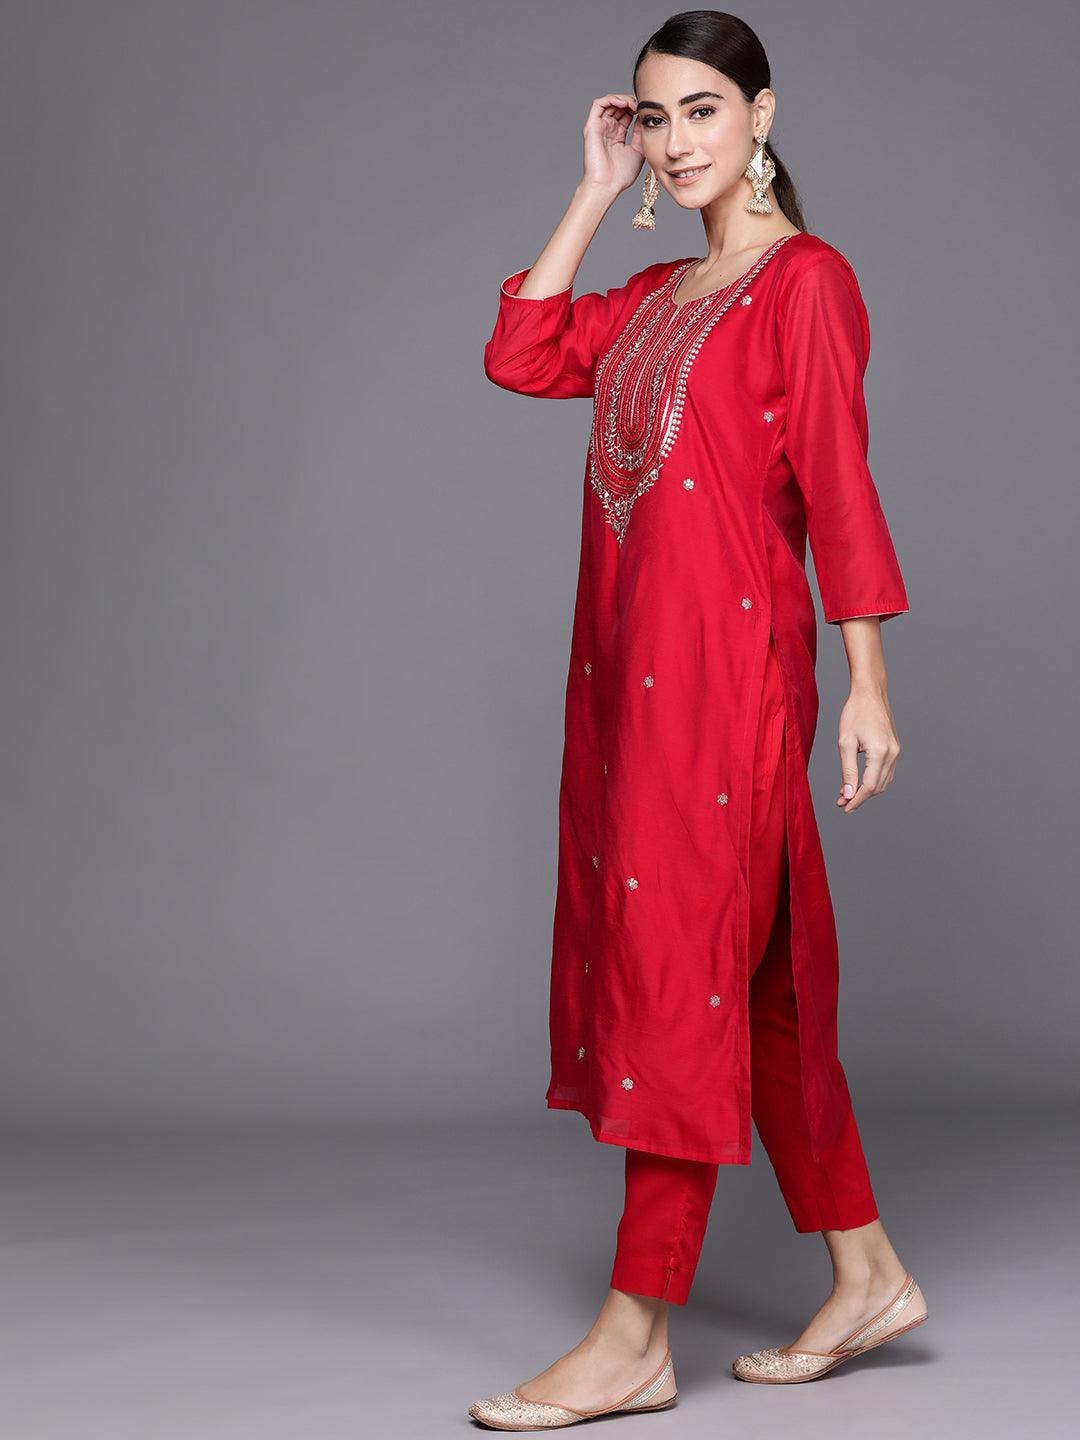 Red Embroidered Chanderi Silk Suit Set - Libas